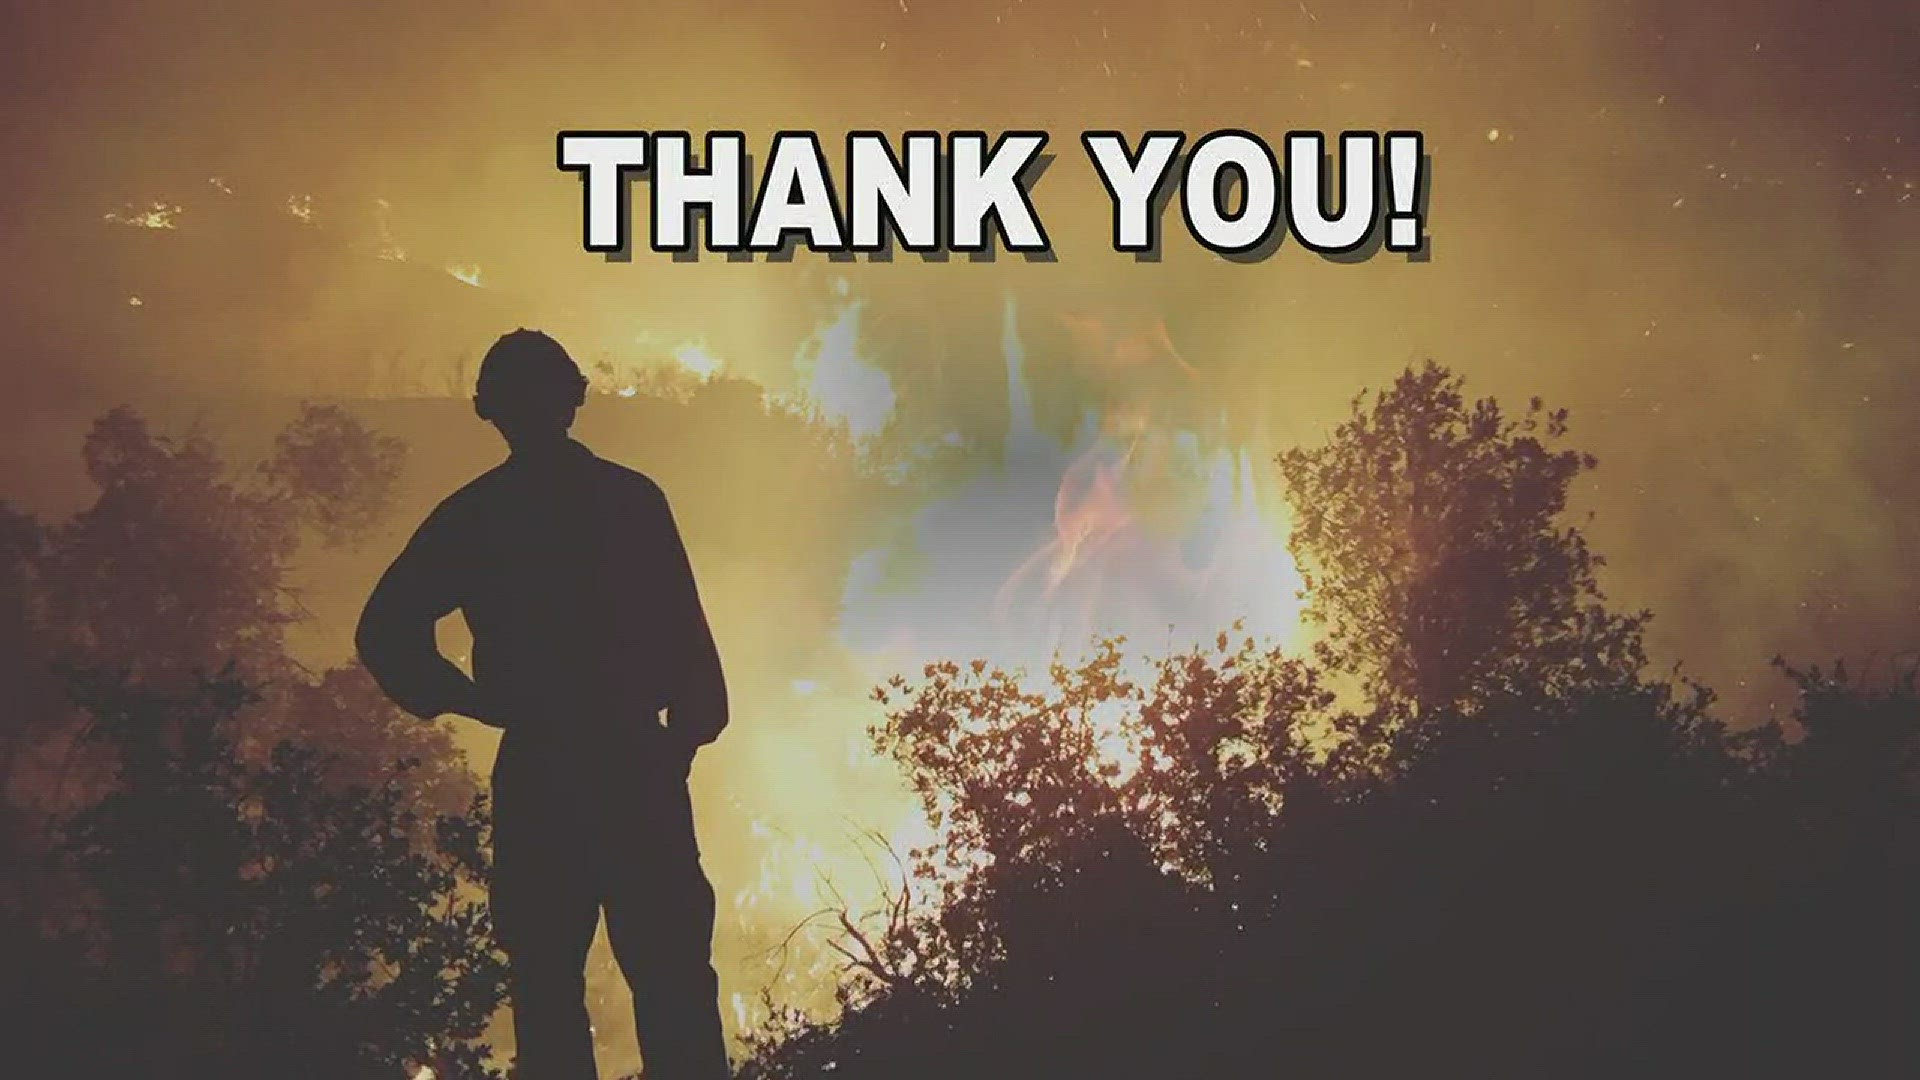 Over 1,100 firefighters have responded to the Goodwin Fire. This is a tribute to thank and honor all the men and women who put their lives on the line to serve and protect.